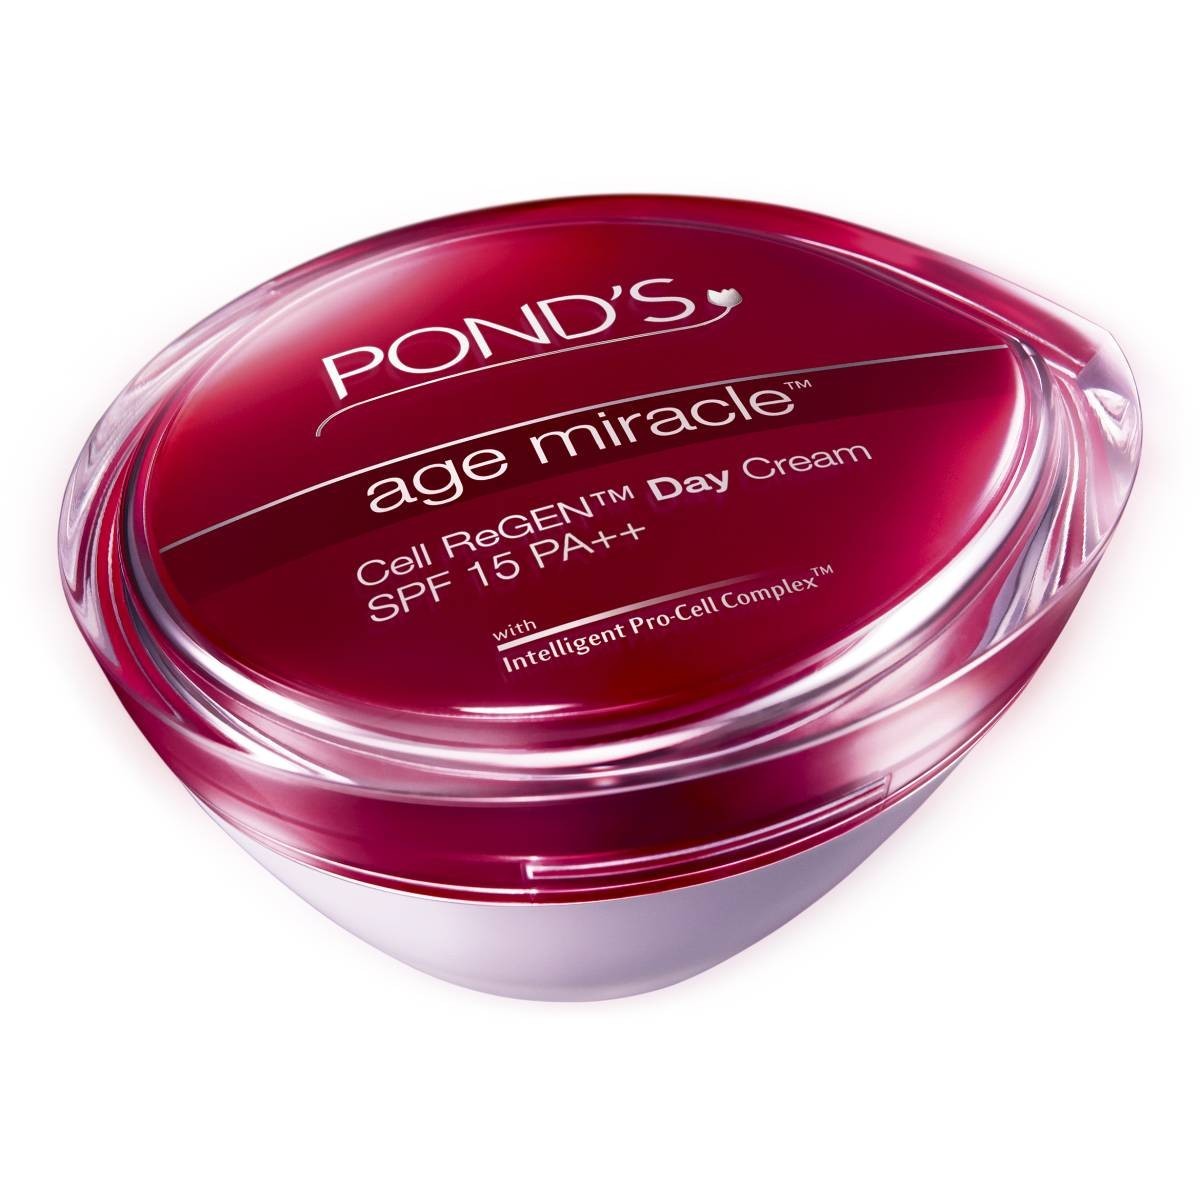 Ponds Day Cream - Age Miracle (SFP 15) 35 gm Pack